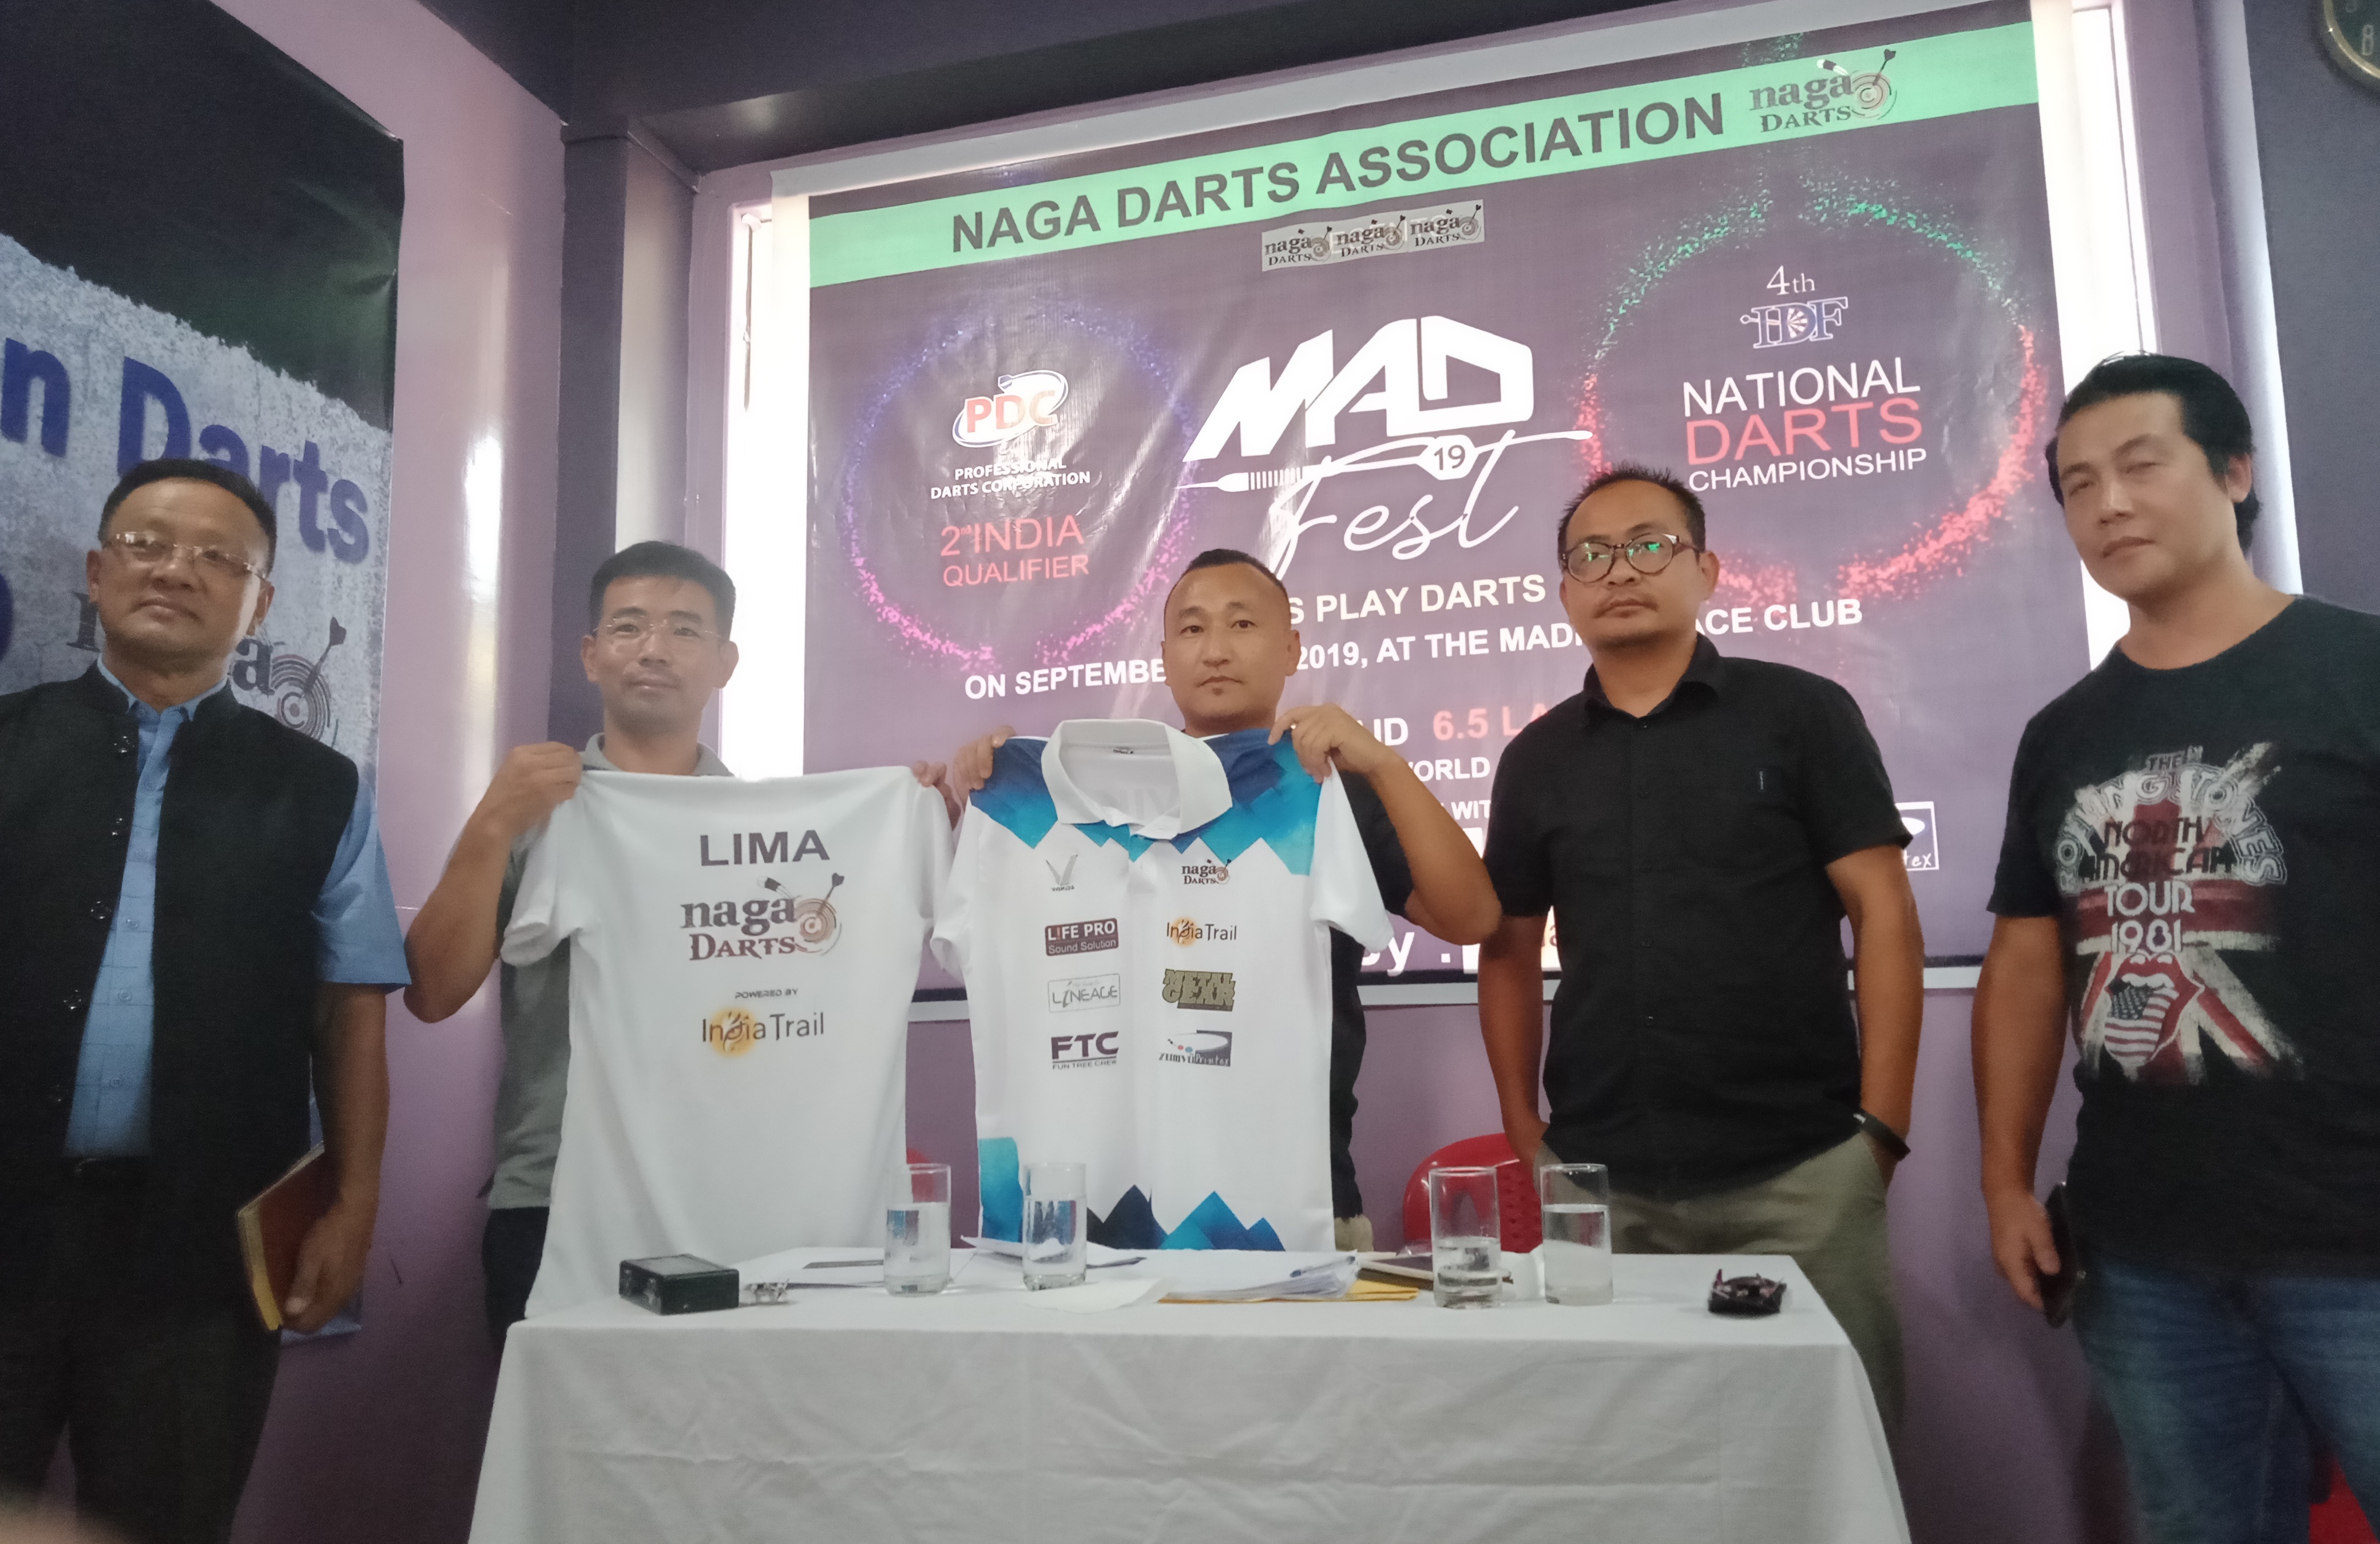 Two Naga darters to join India qualifier round for World Darts Championship